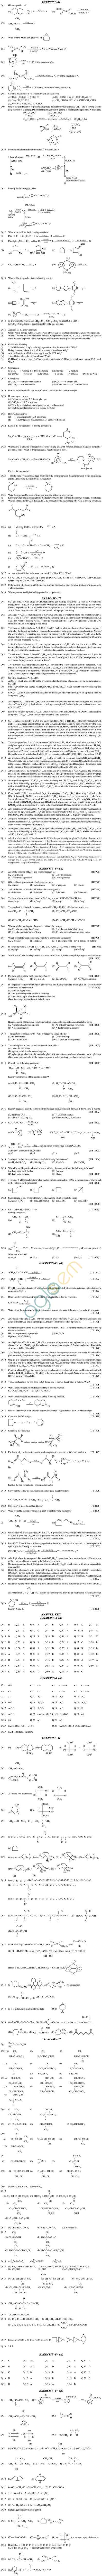 Chemistry Study Material - Chapter 16